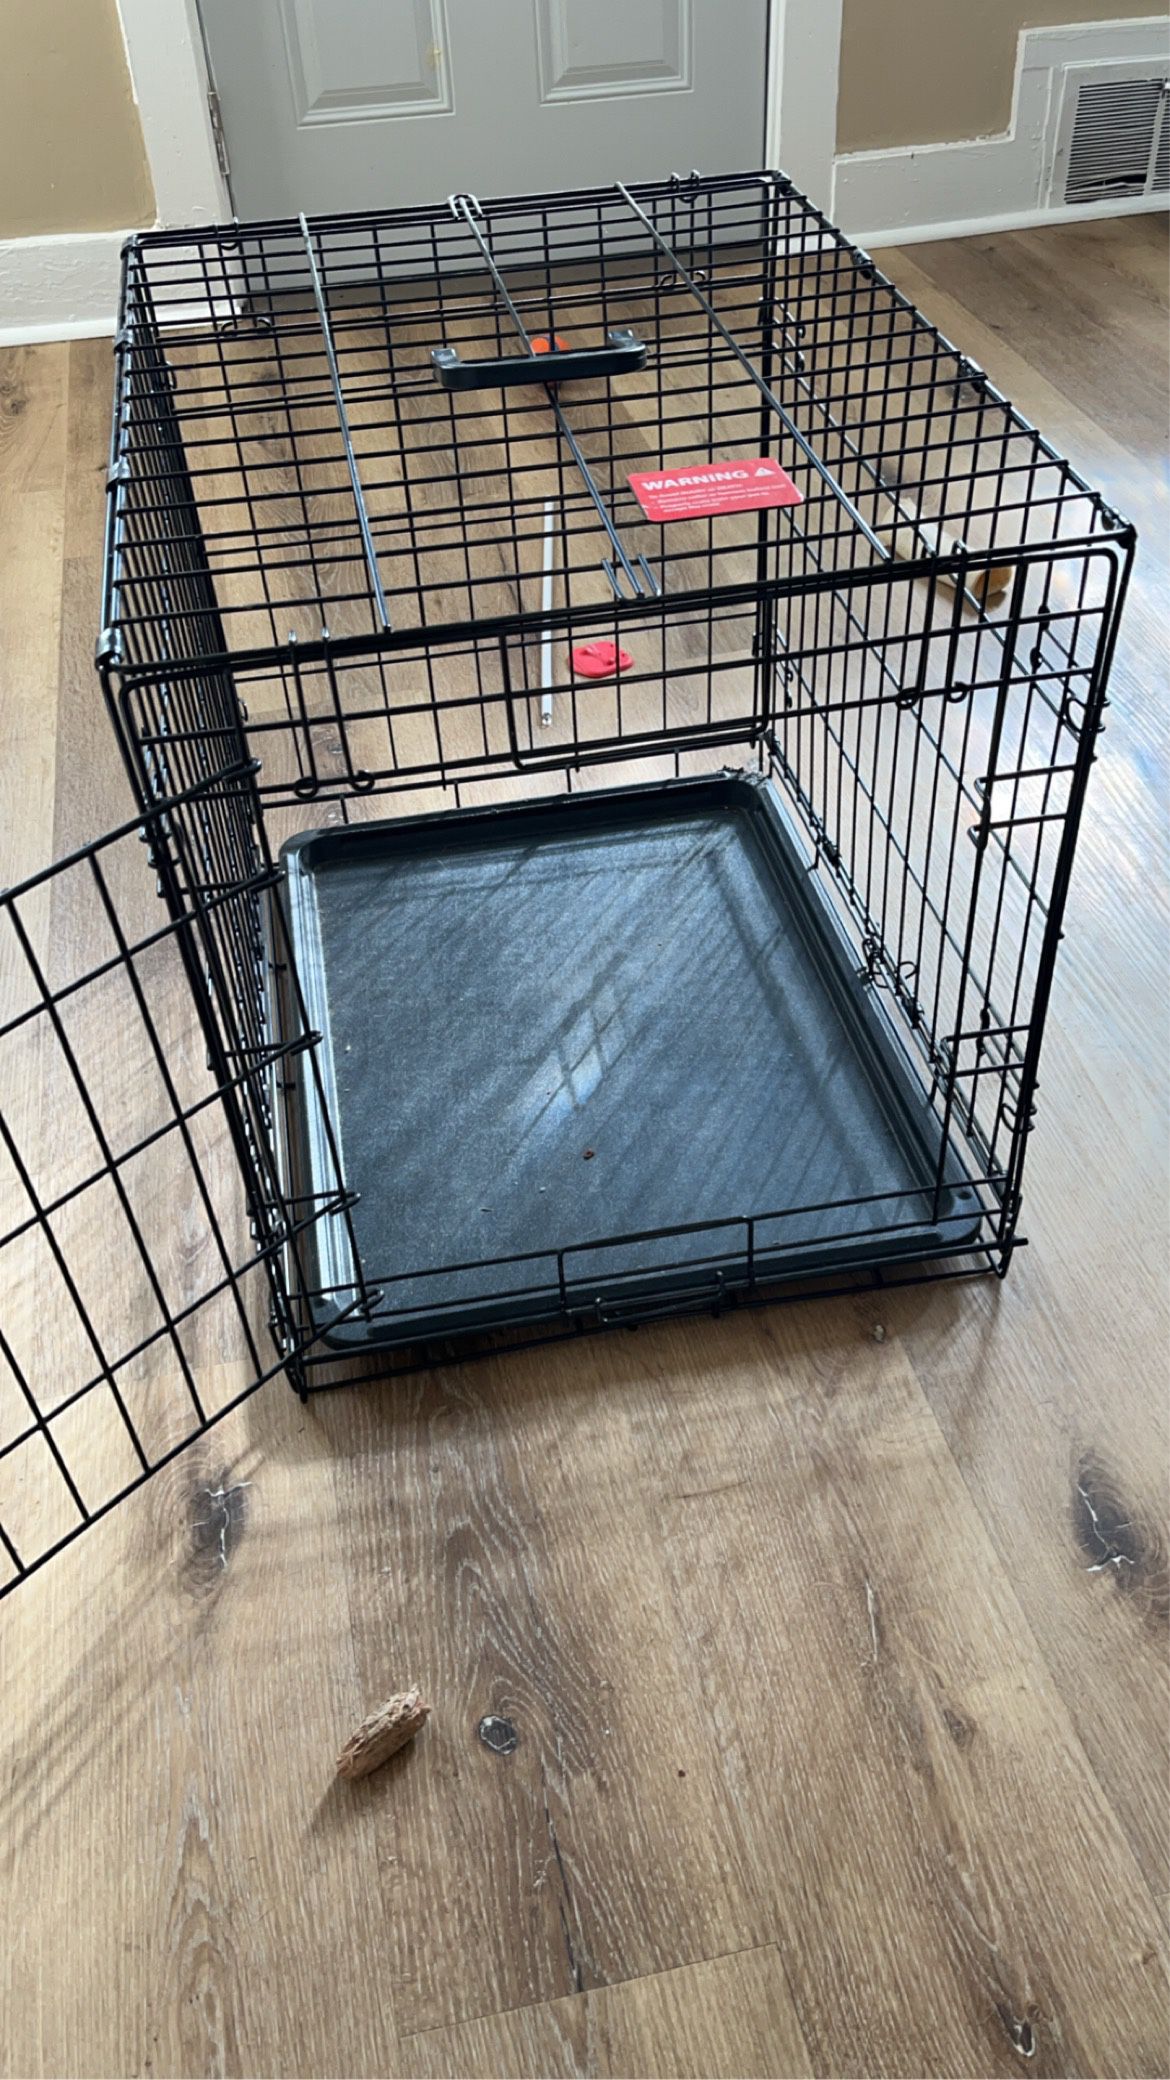 Small Dog Cage. 